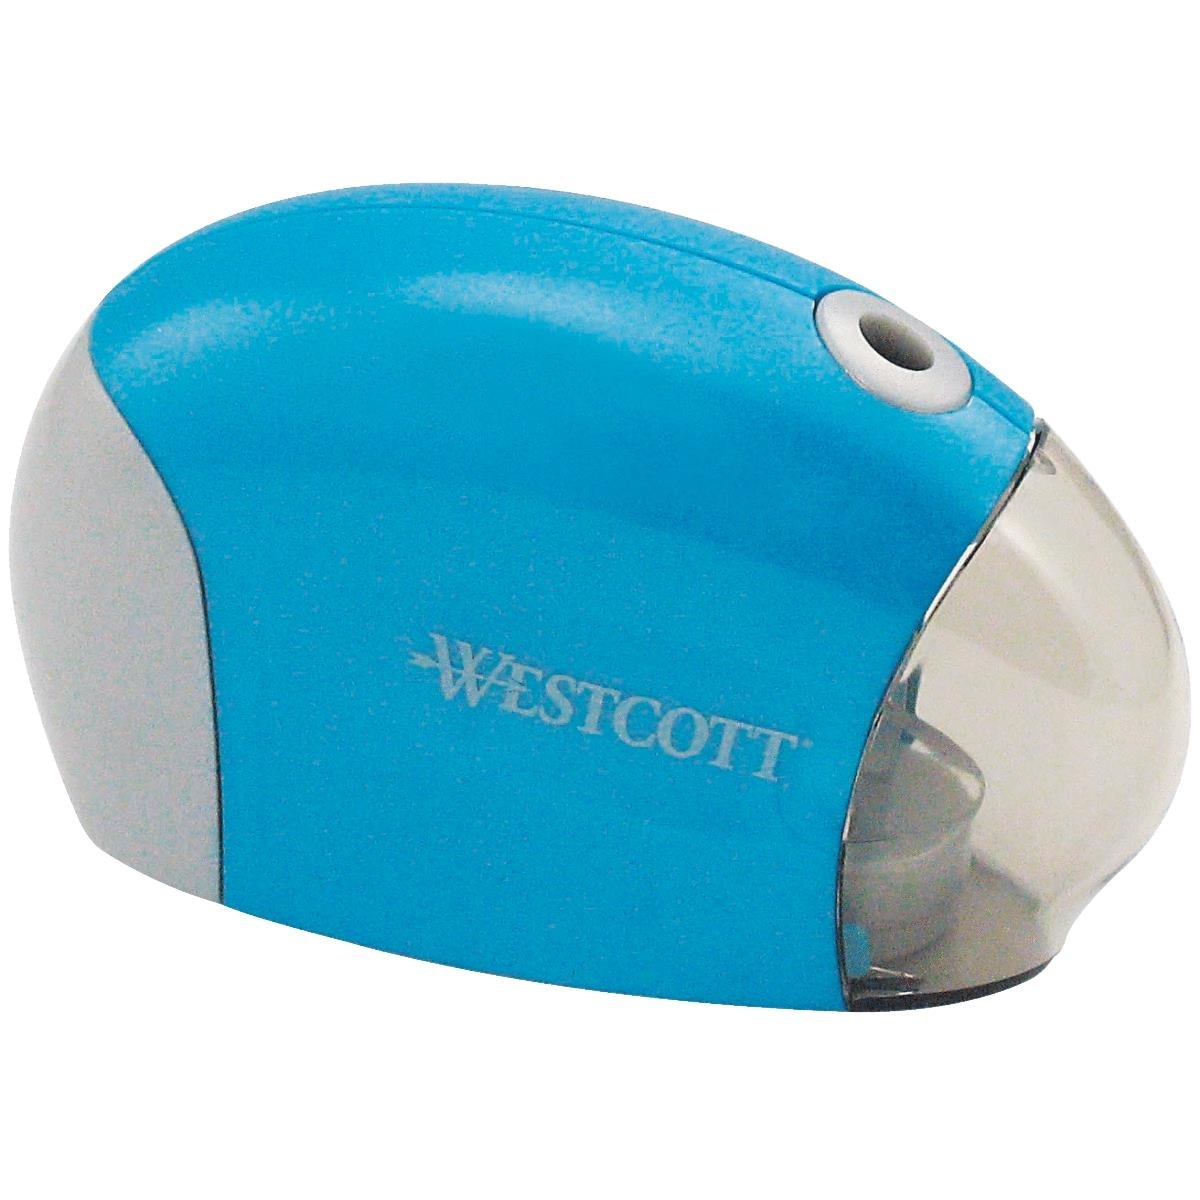 https://ak1.ostkcdn.com/images/products/is/images/direct/601516180a67c2be1e9794a77ef269b7237faa23/Westcott-Battery-Pencil-Sharpener.jpg